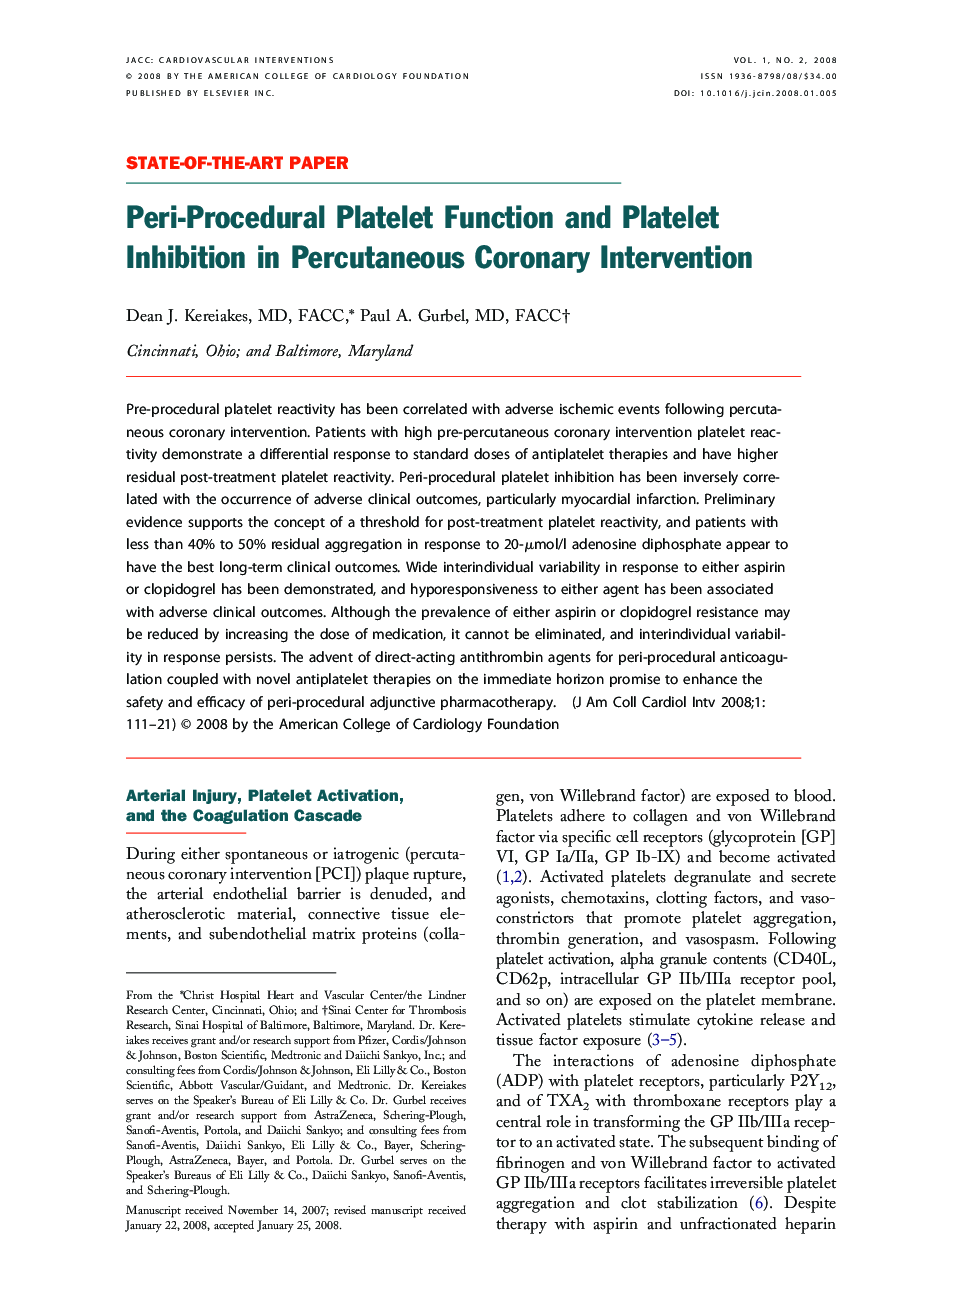 Peri-Procedural Platelet Function and Platelet Inhibition in Percutaneous Coronary Intervention 